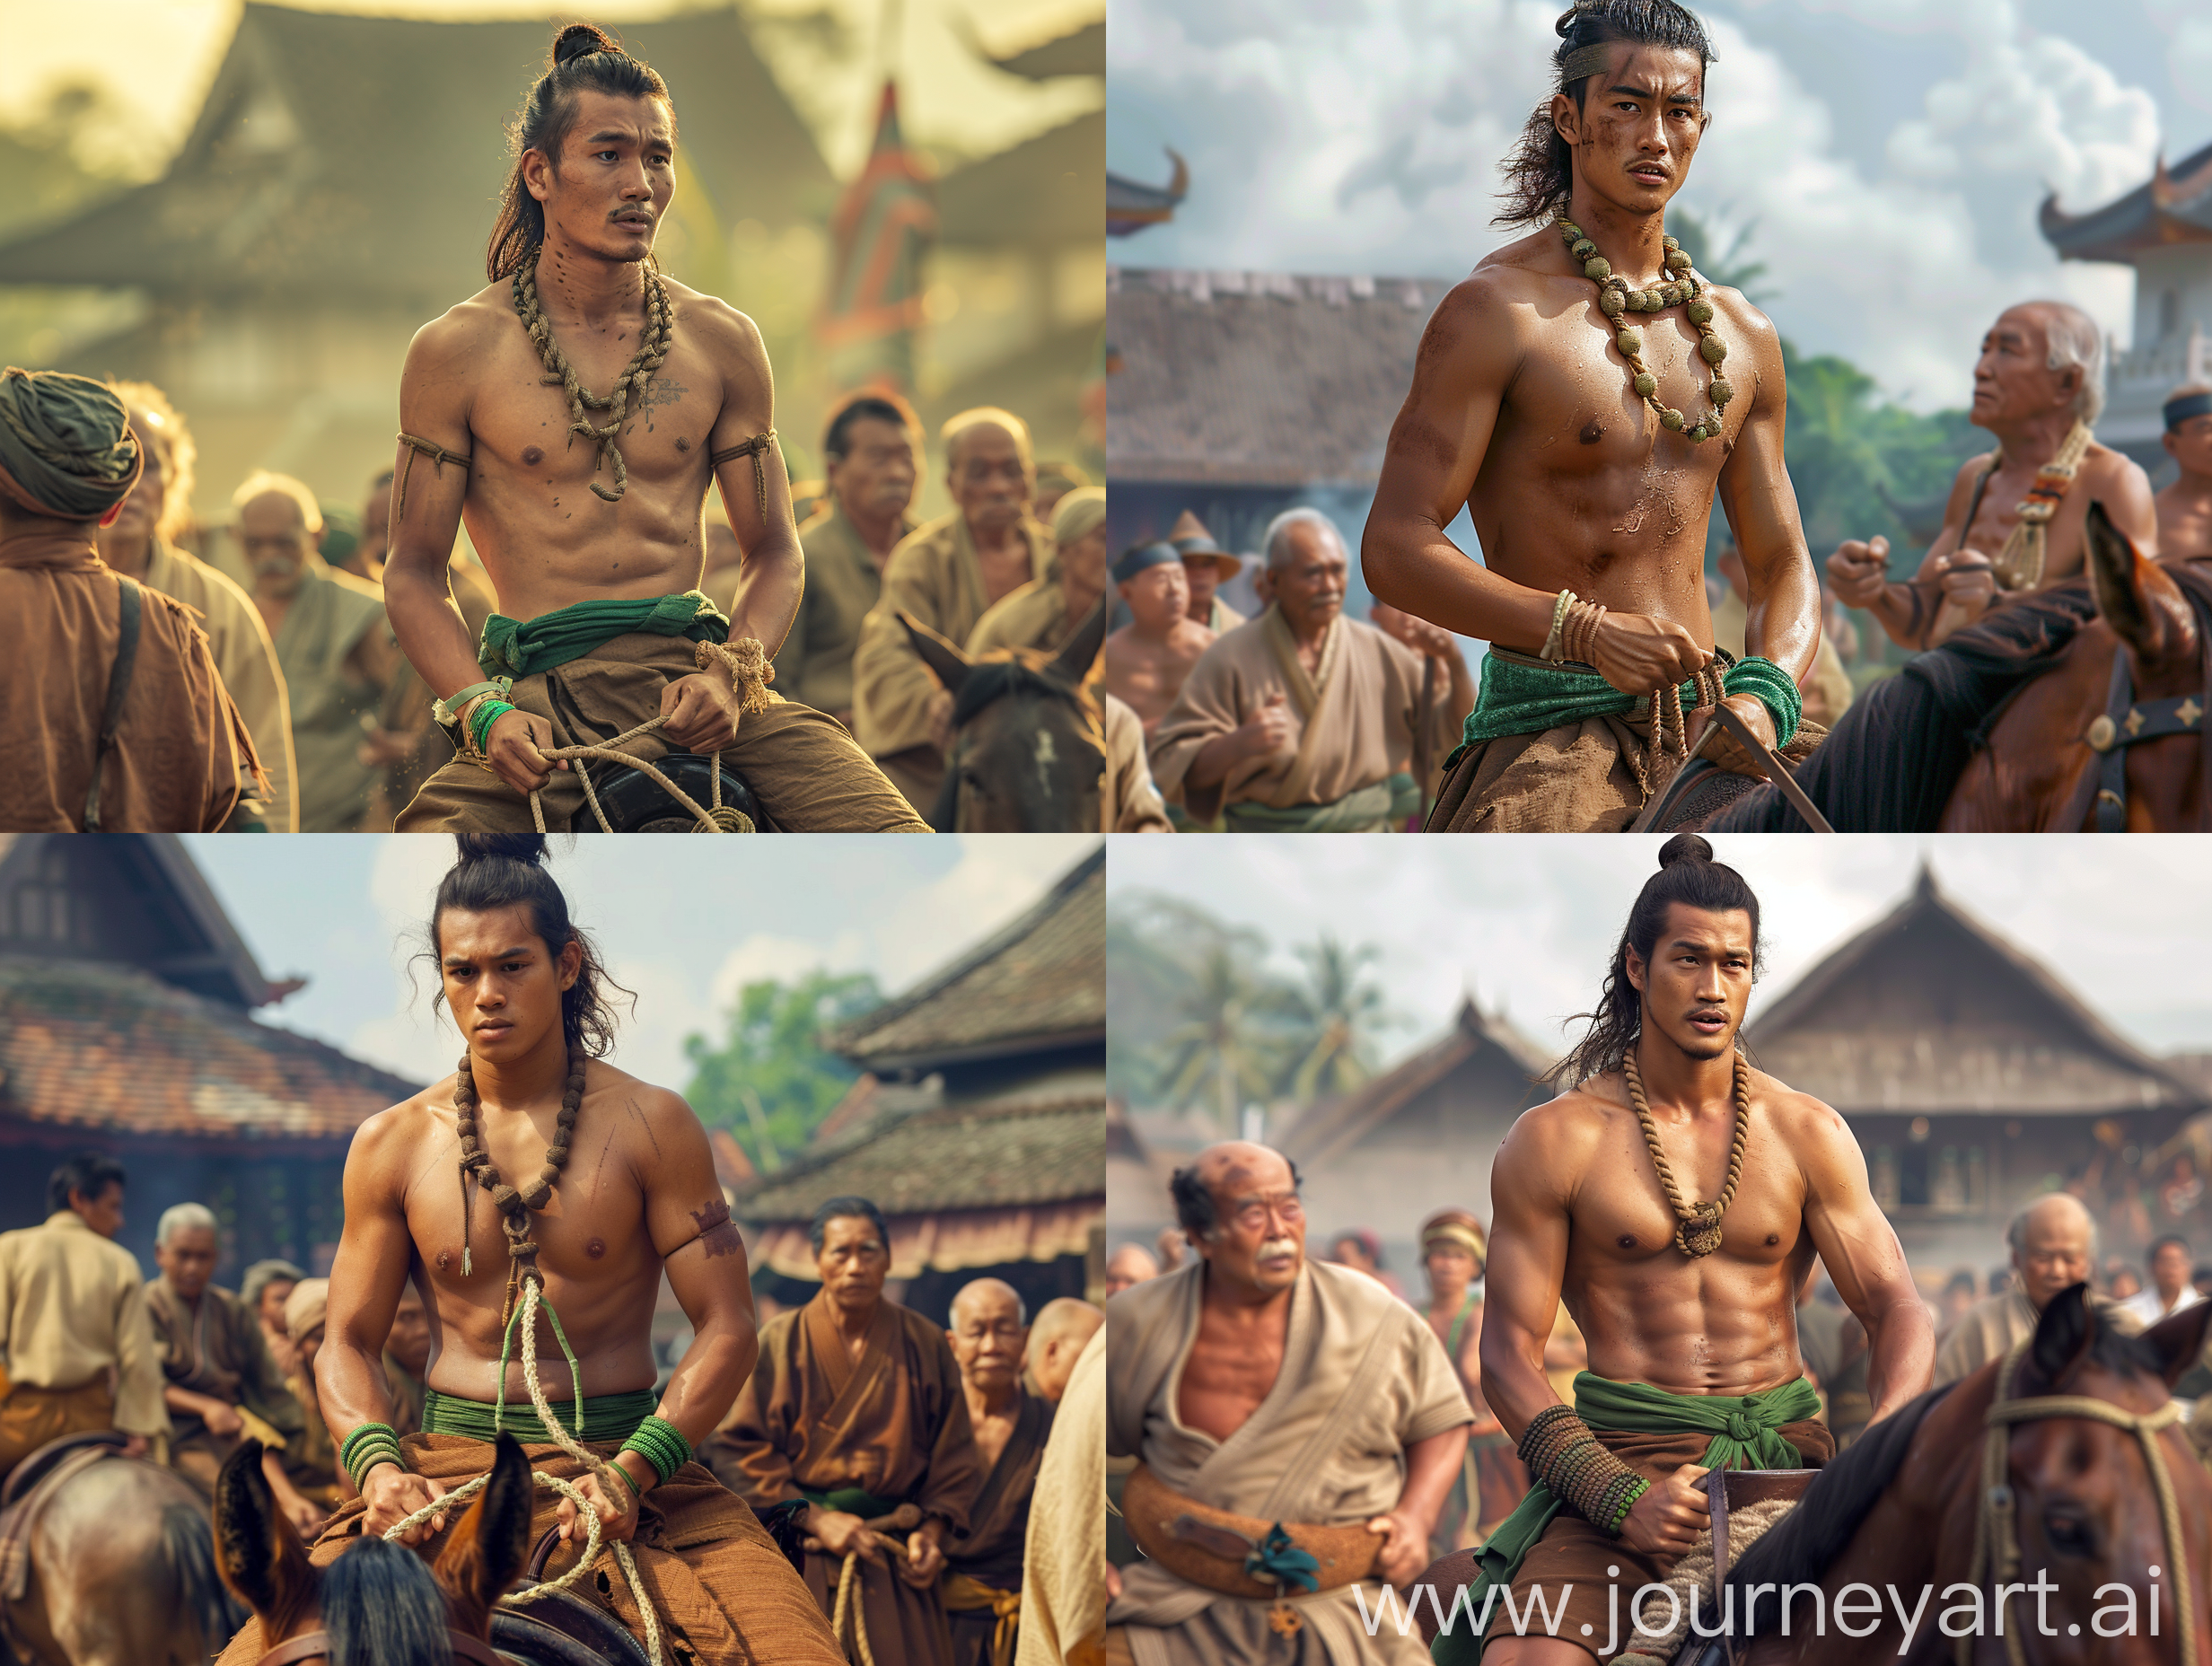 Cinematic, film style, 30 year old Indonesian man with square and clean face, long hair in a small bun, stocky body, riding a horse, wearing a rope necklace, green cloth bracelet, brown shorts, green cloth belt, strappy sandals, practicing martial arts with old men, around the kingdom, during the day. Very detailed, movie style, very real, ultra HD